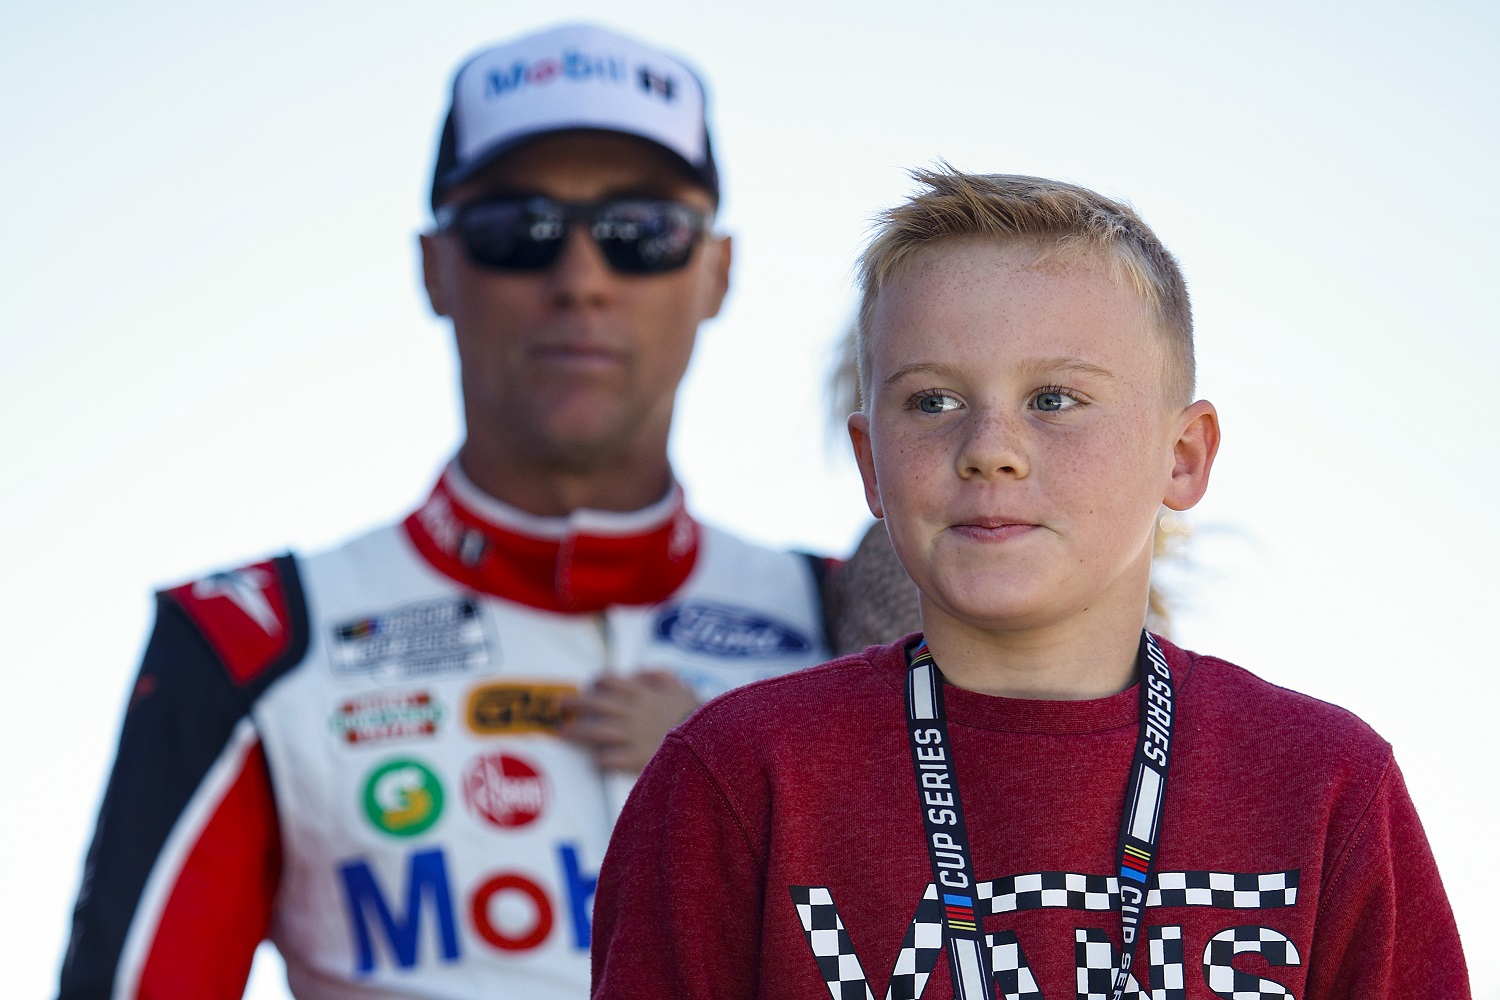 Keelan Harvick, the son of Kevin Harvick, walks onstage during driver intros prior to  the NASCAR Cup Series Folds of Honor QuikTrip 500 at Atlanta Motor Speedway on March 20, 2022. | Sean Gardner/Getty Images